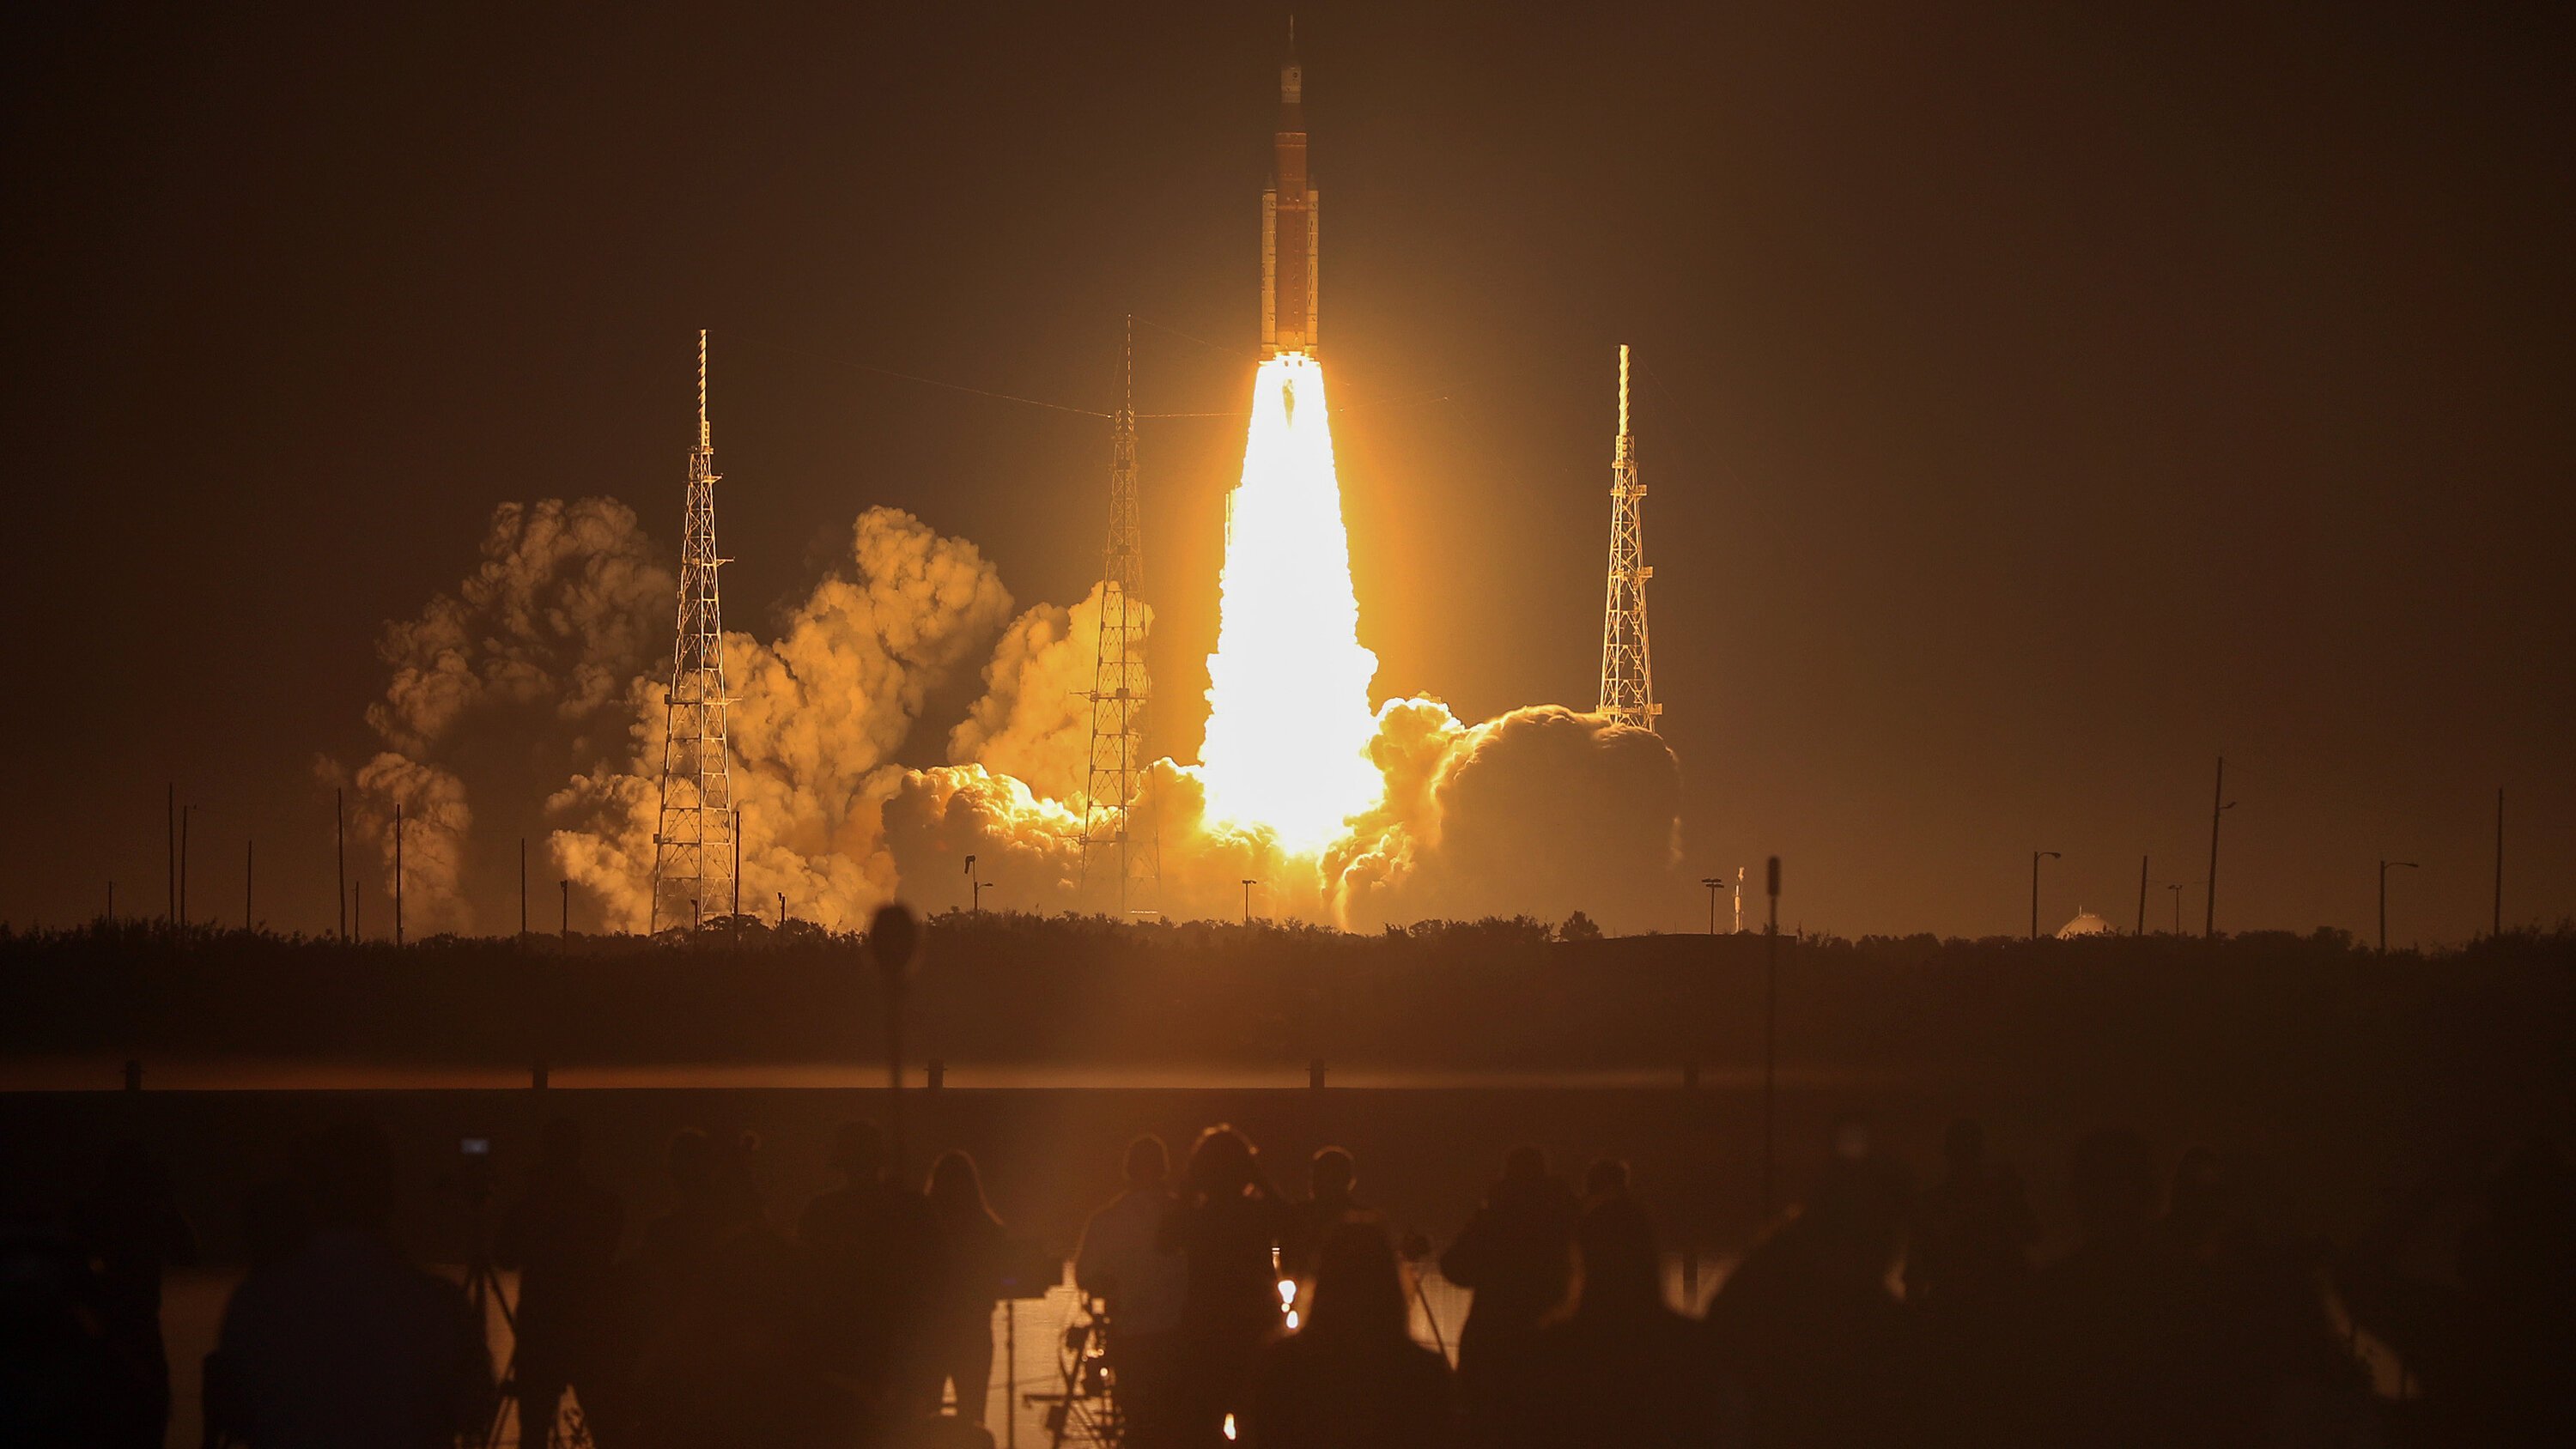 NASA’s Artemis I mission has successfully launched – NASA